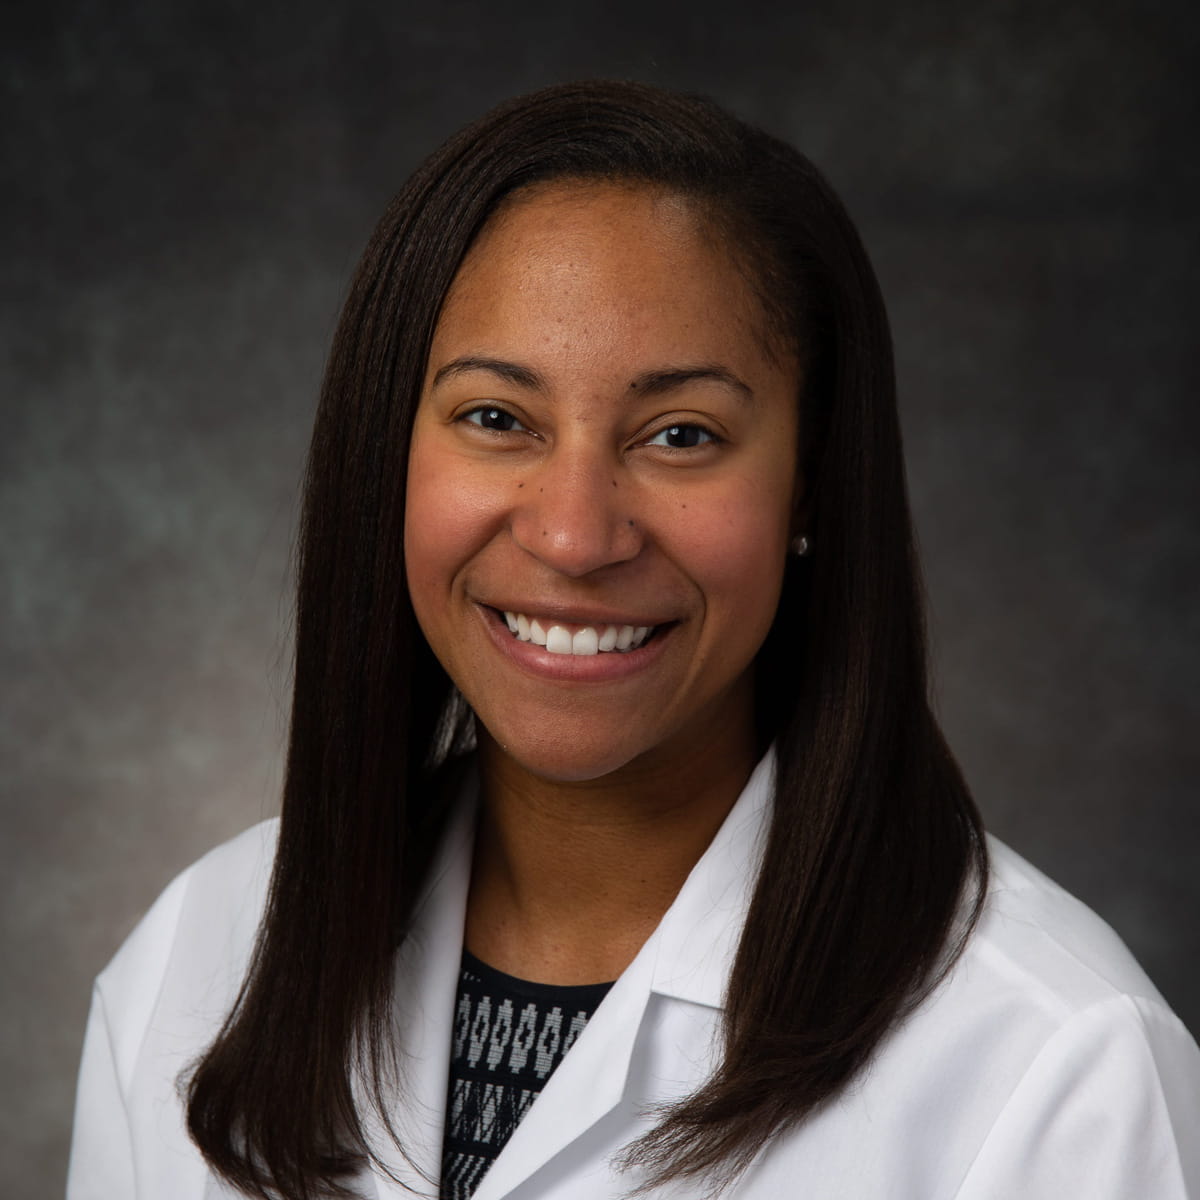 A friendly image of Janna Williams Pitts, MD